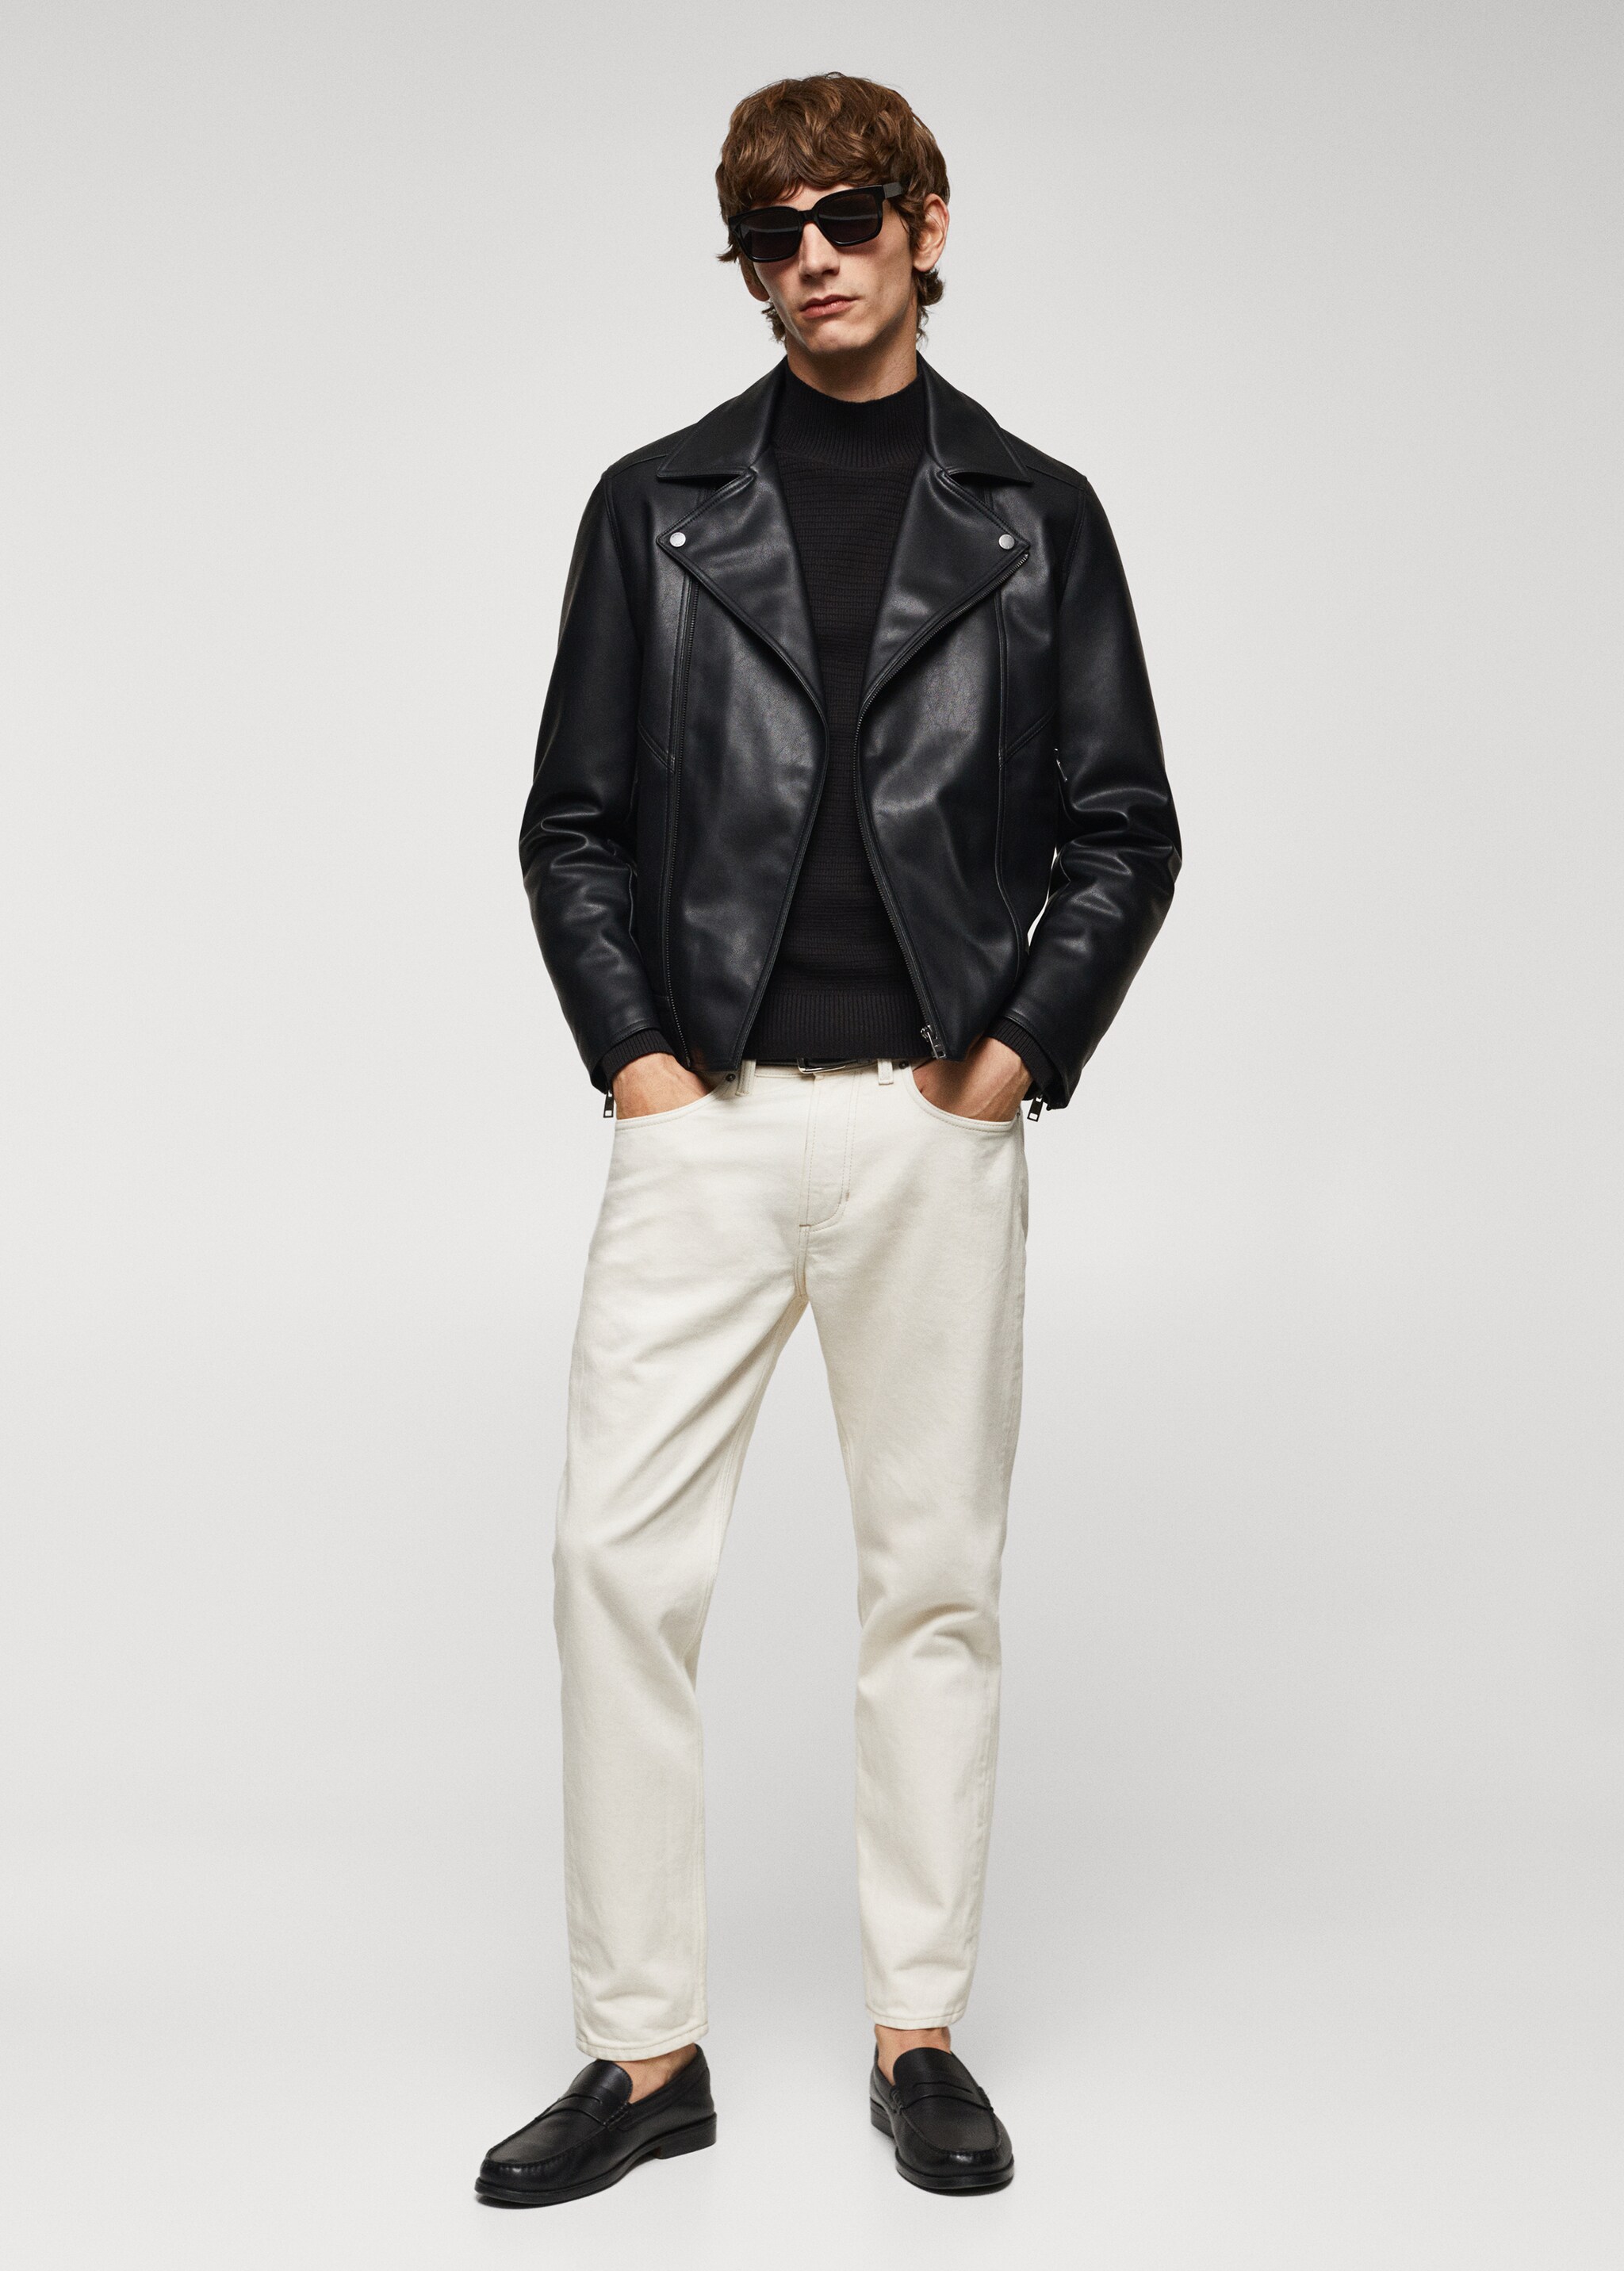 Perfect leather-effect jacket - General plane